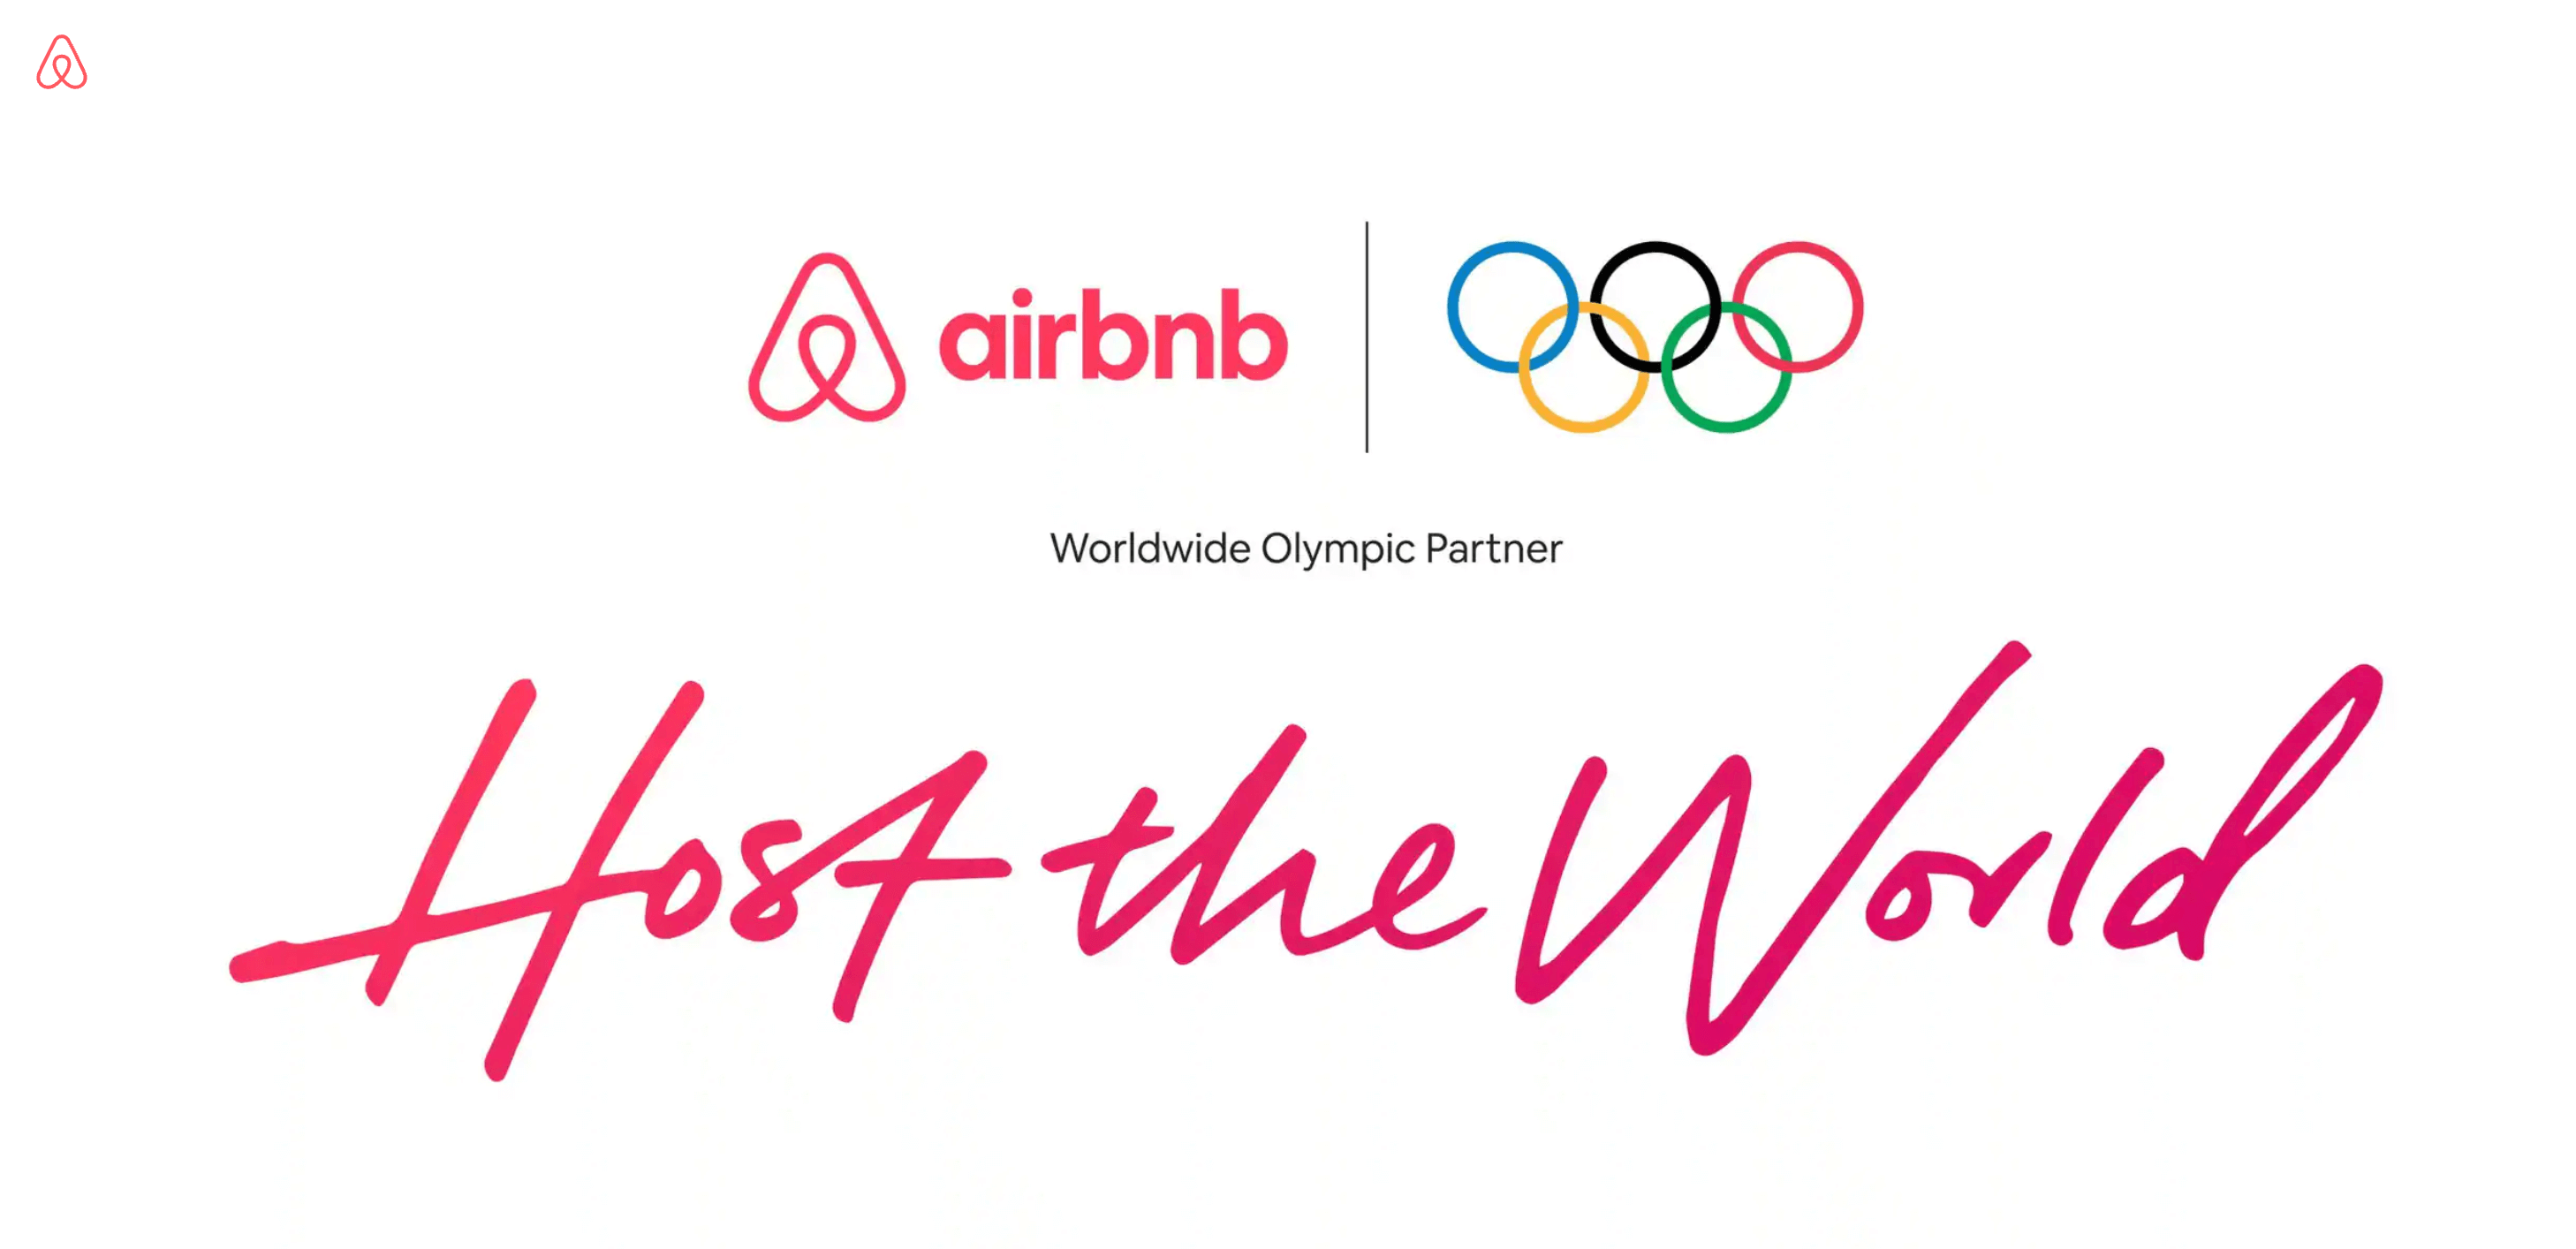 airbnb-sponsos-olympic-games